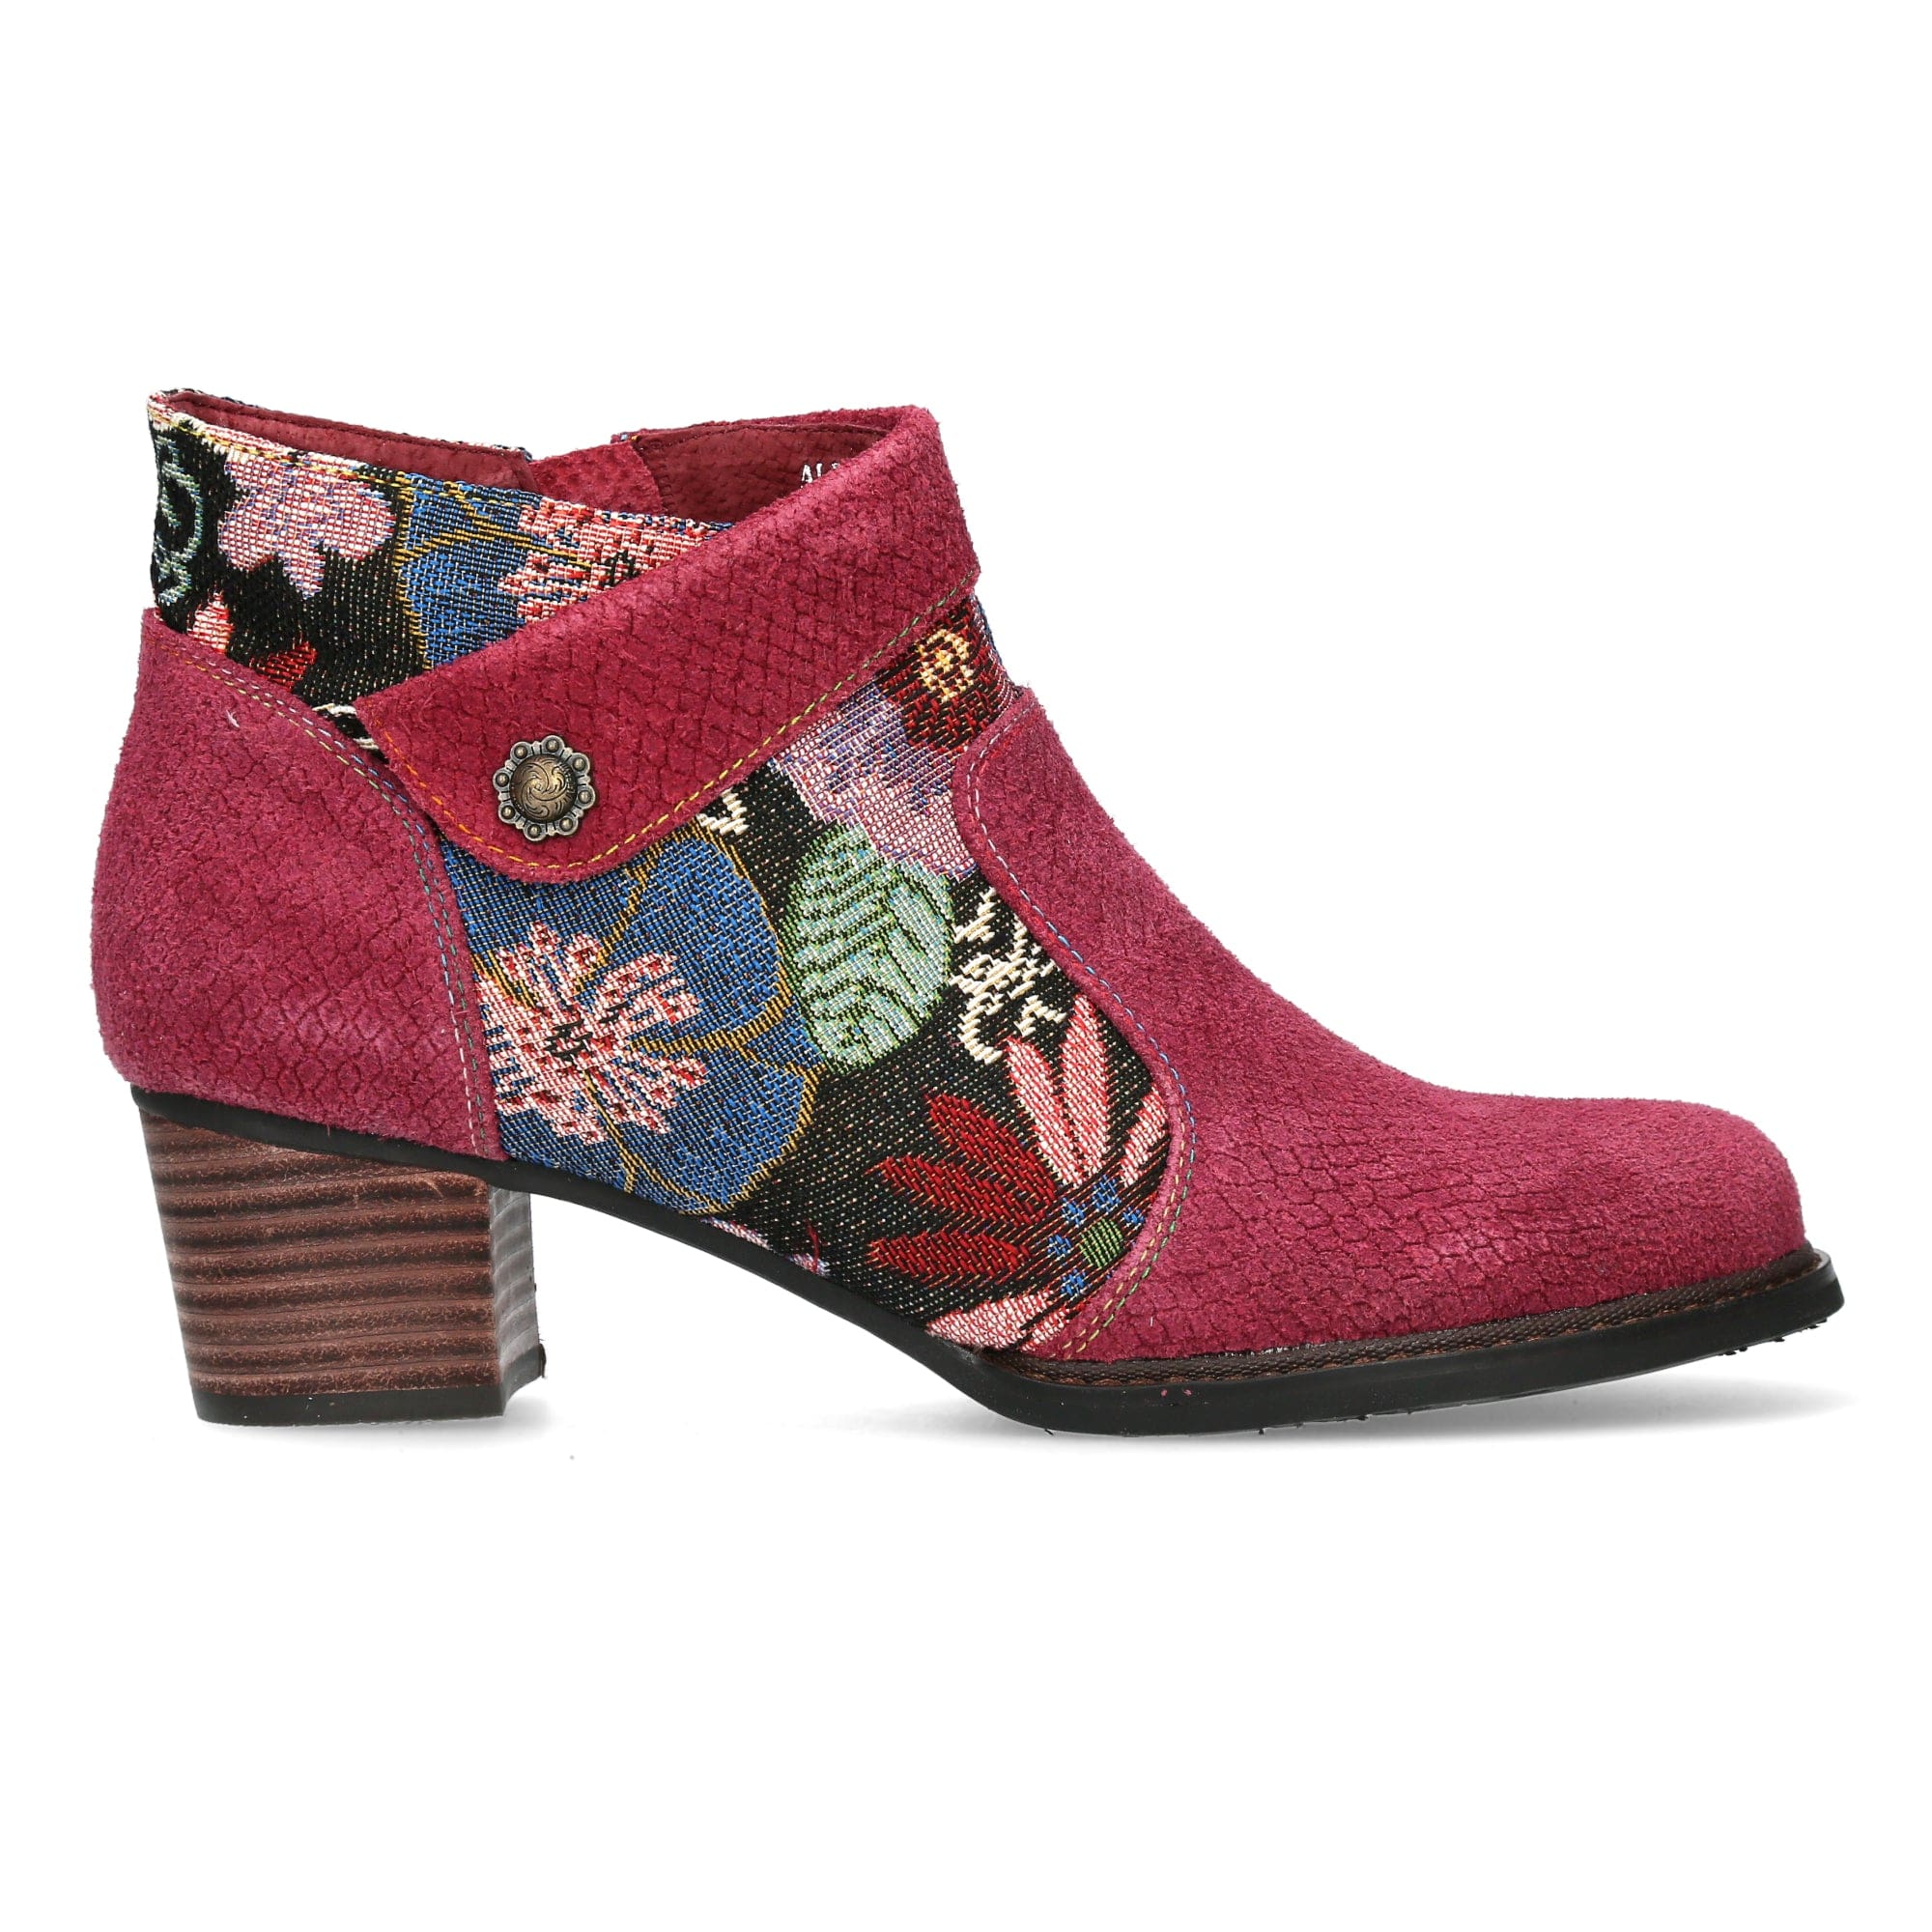 Chaussure ALEXIA 13 - 35 / Framboise - Boots